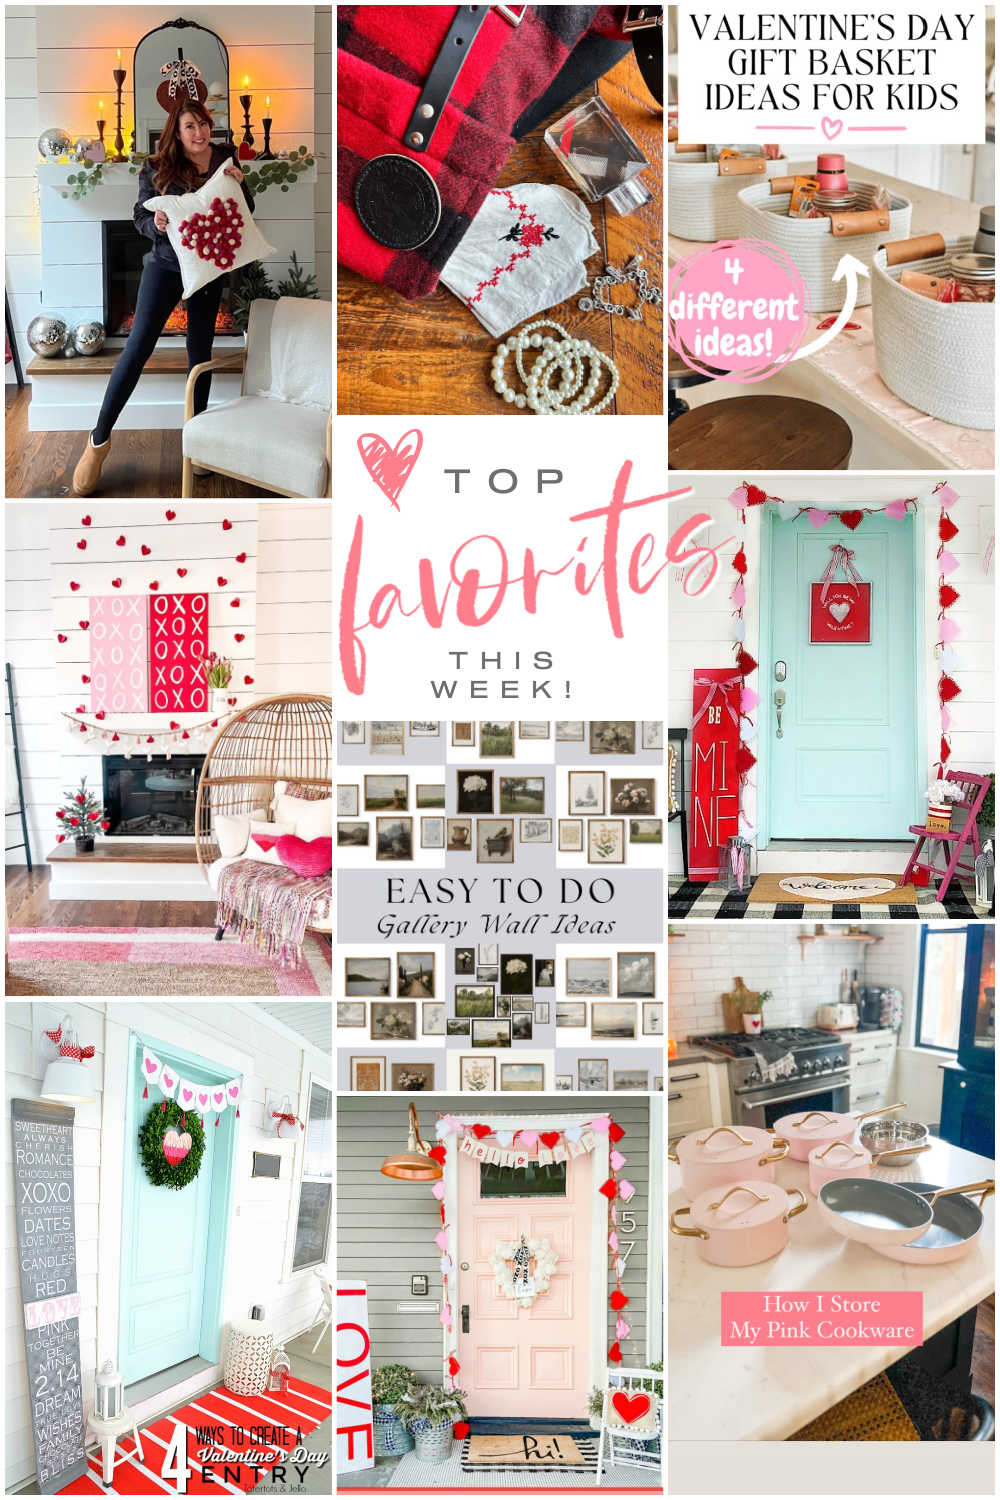 Things I Love This Week - January! Here are some ideas to bring some January cheer to your home! 